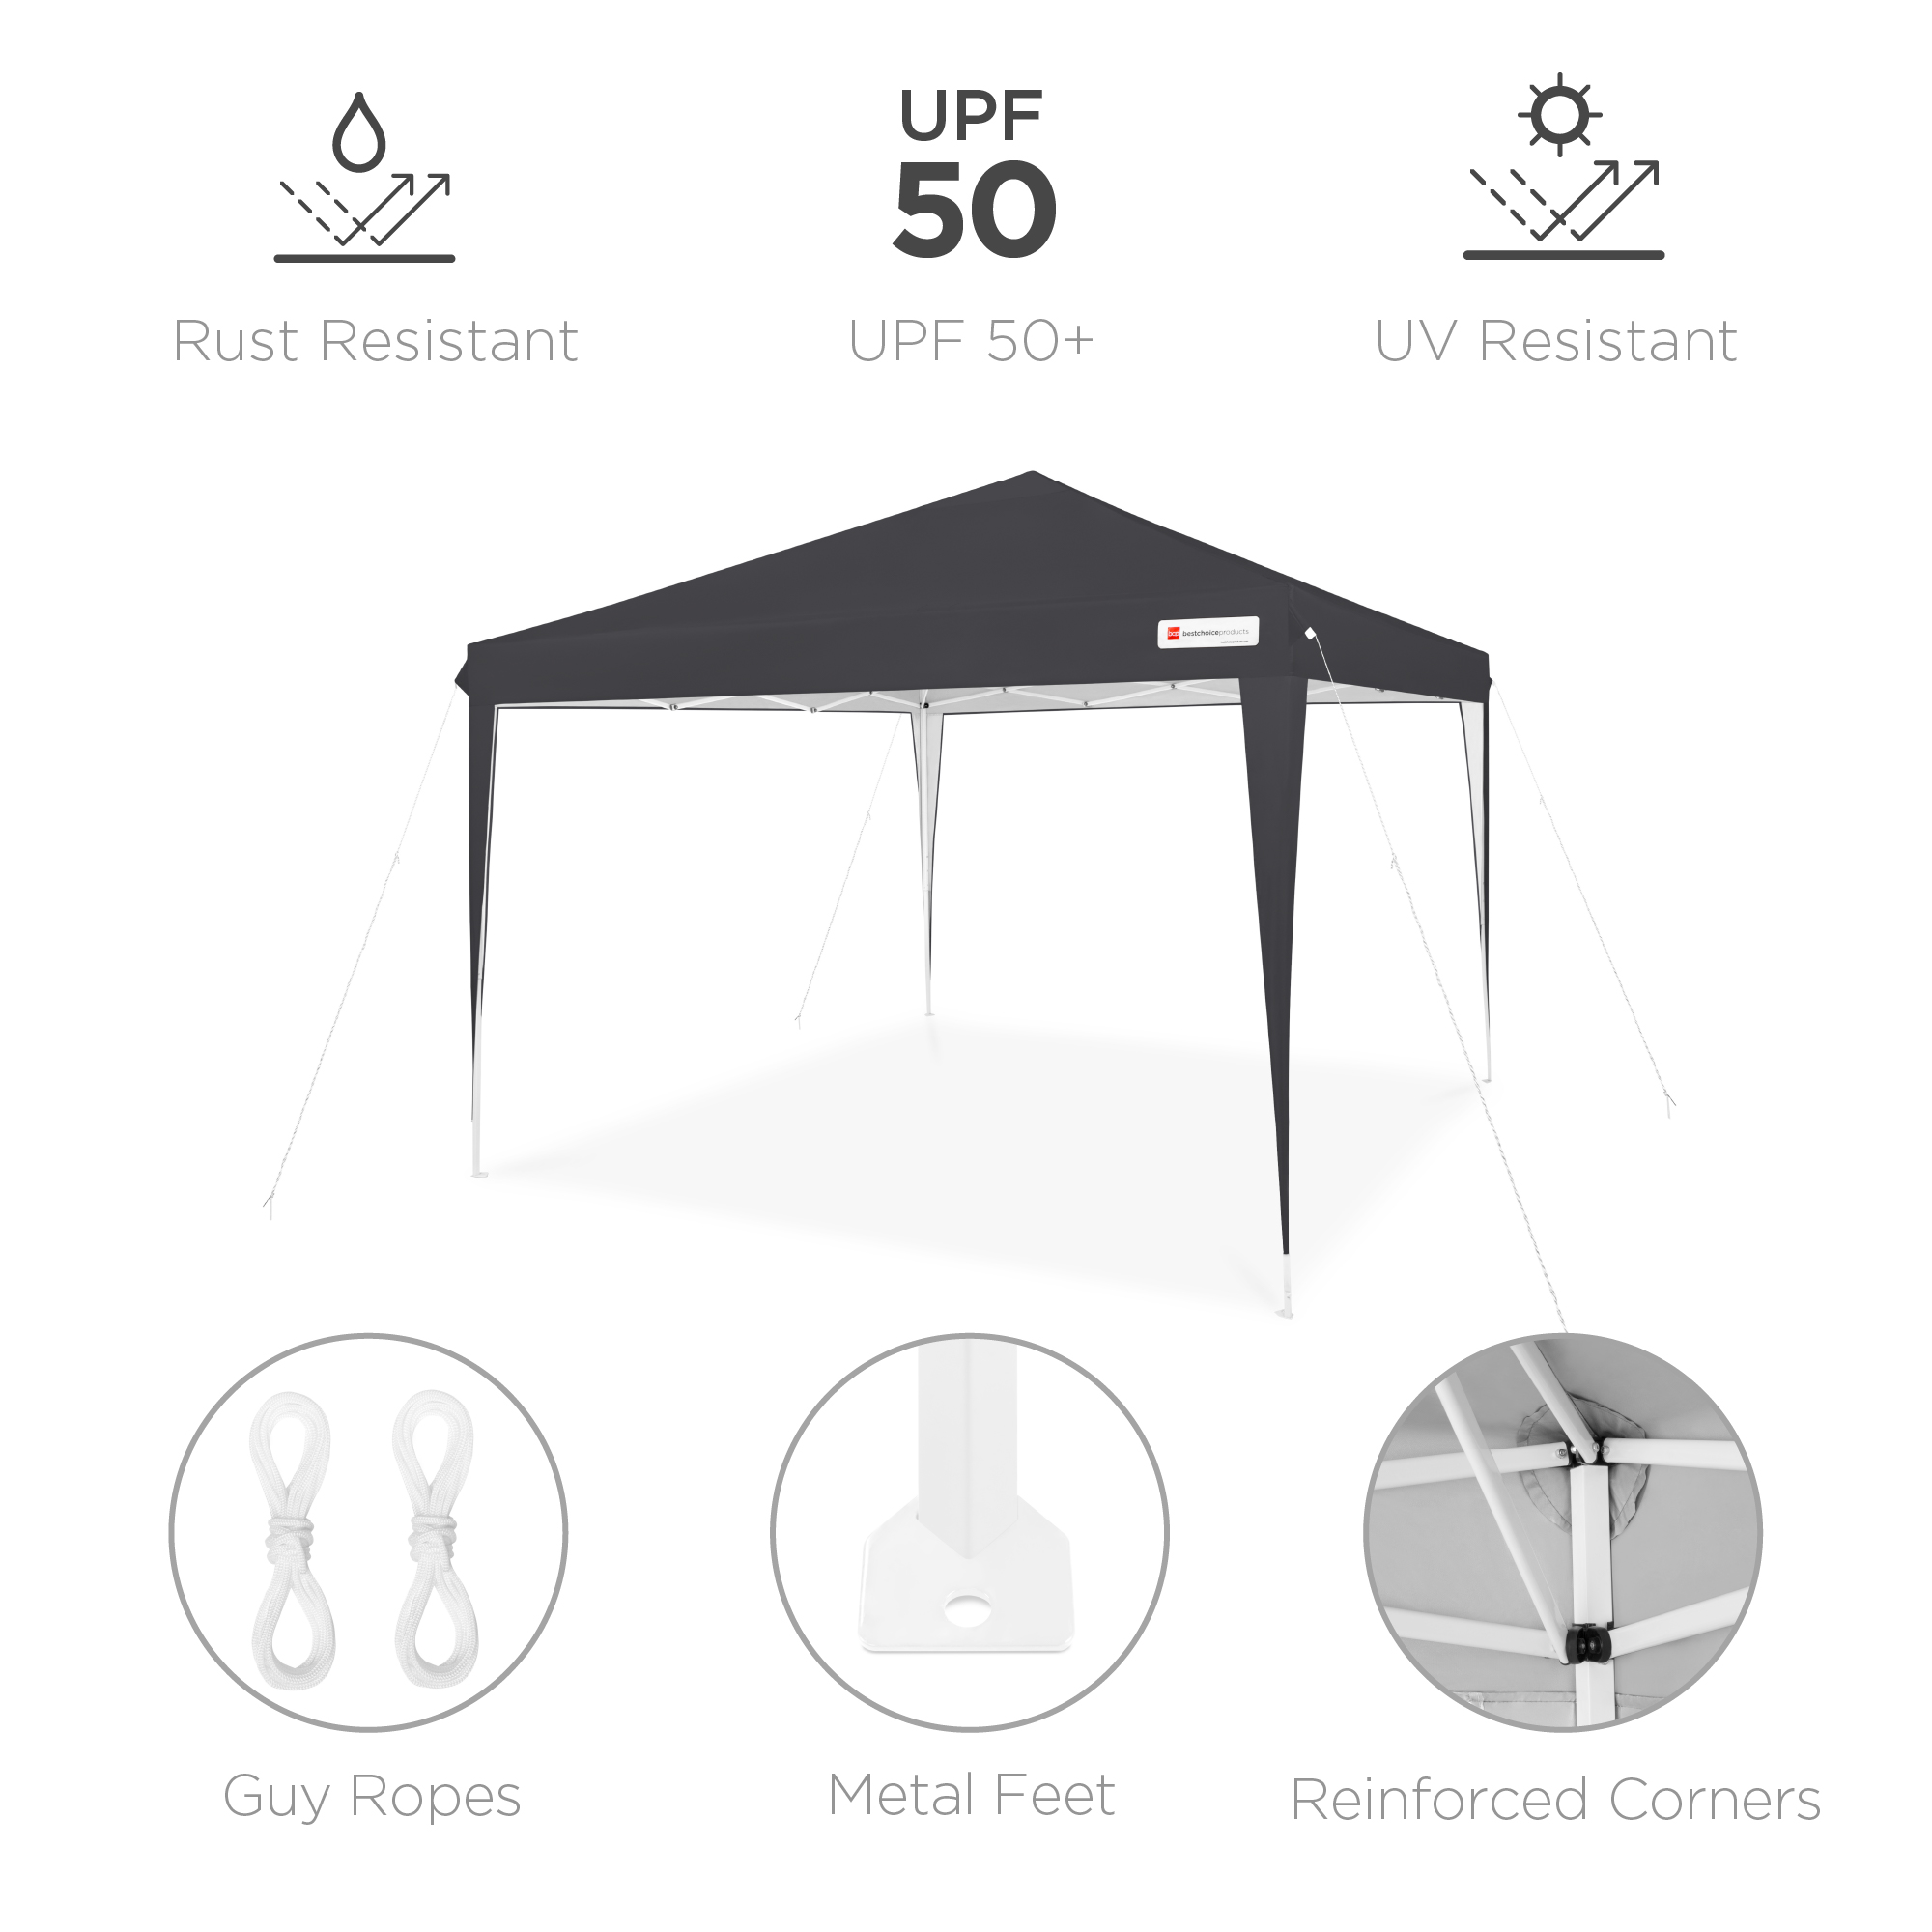 Best Choice Products 10x10ft Pop Up Canopy Outdoor Portable Adjustable Instant Gazebo Tent w/ Carrying Bag - Black - image 5 of 8